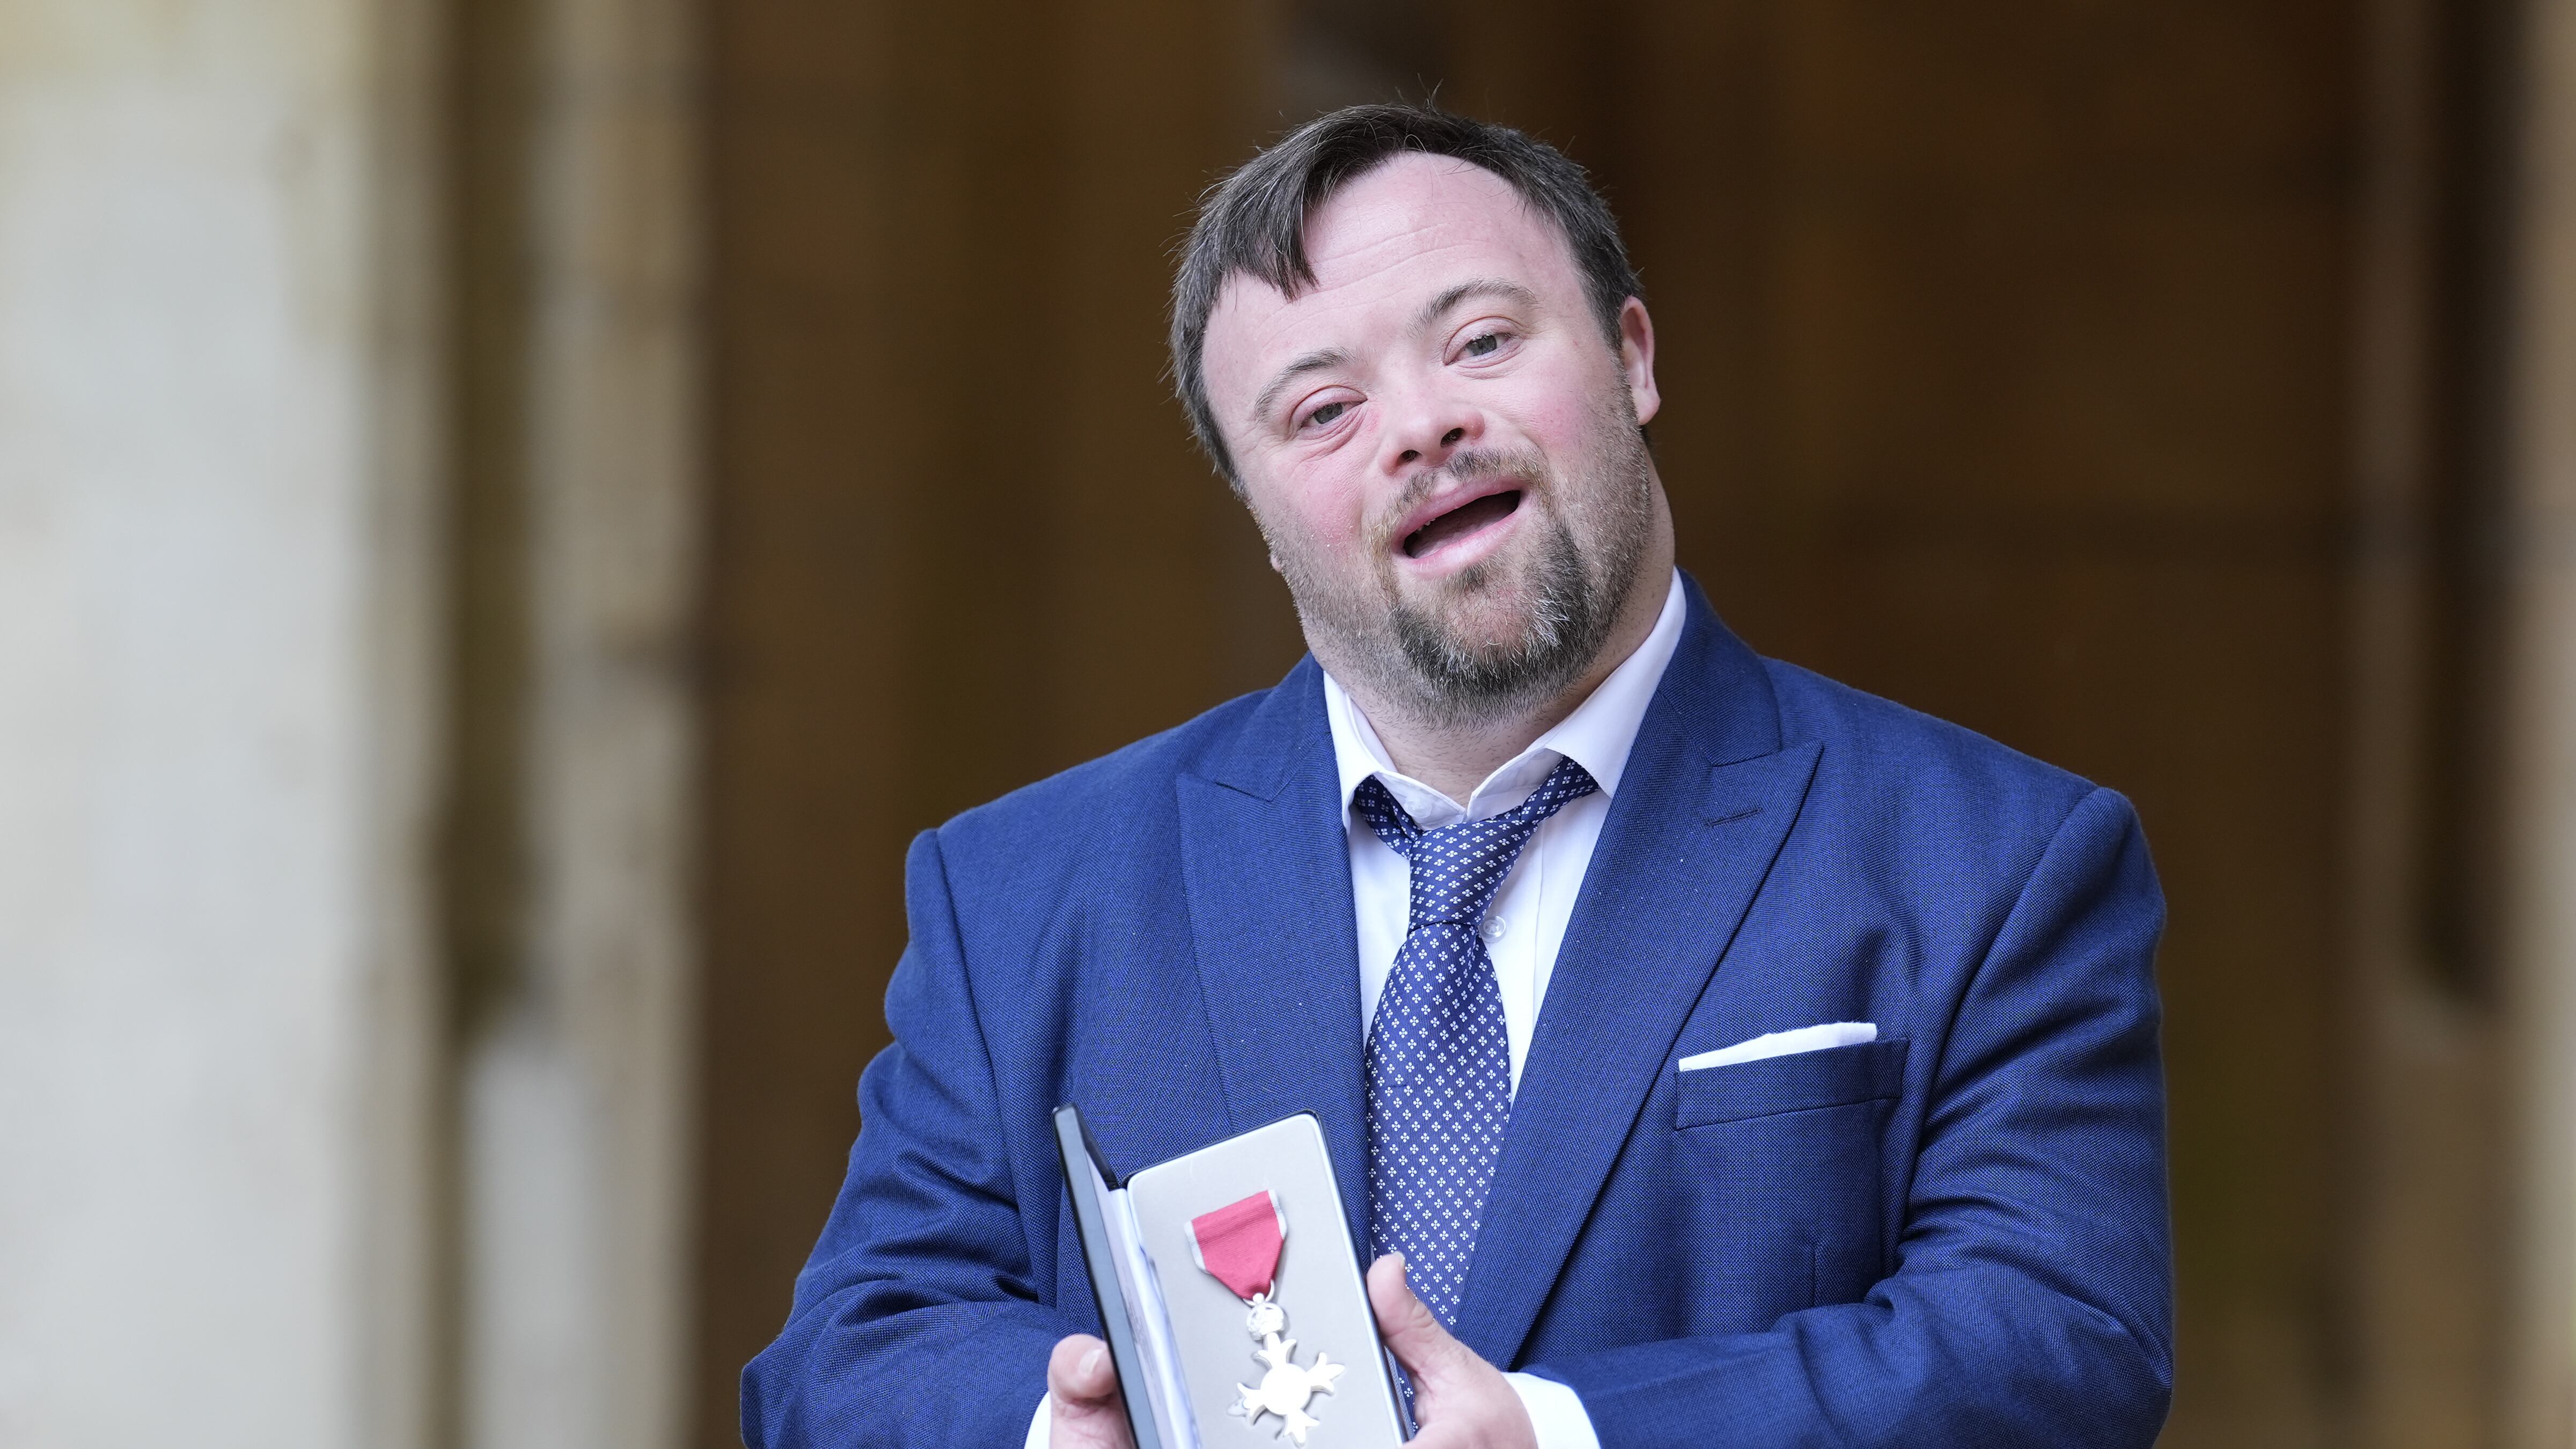 James Martin was made an MBE by the Prince of Wales at Windsor Castle